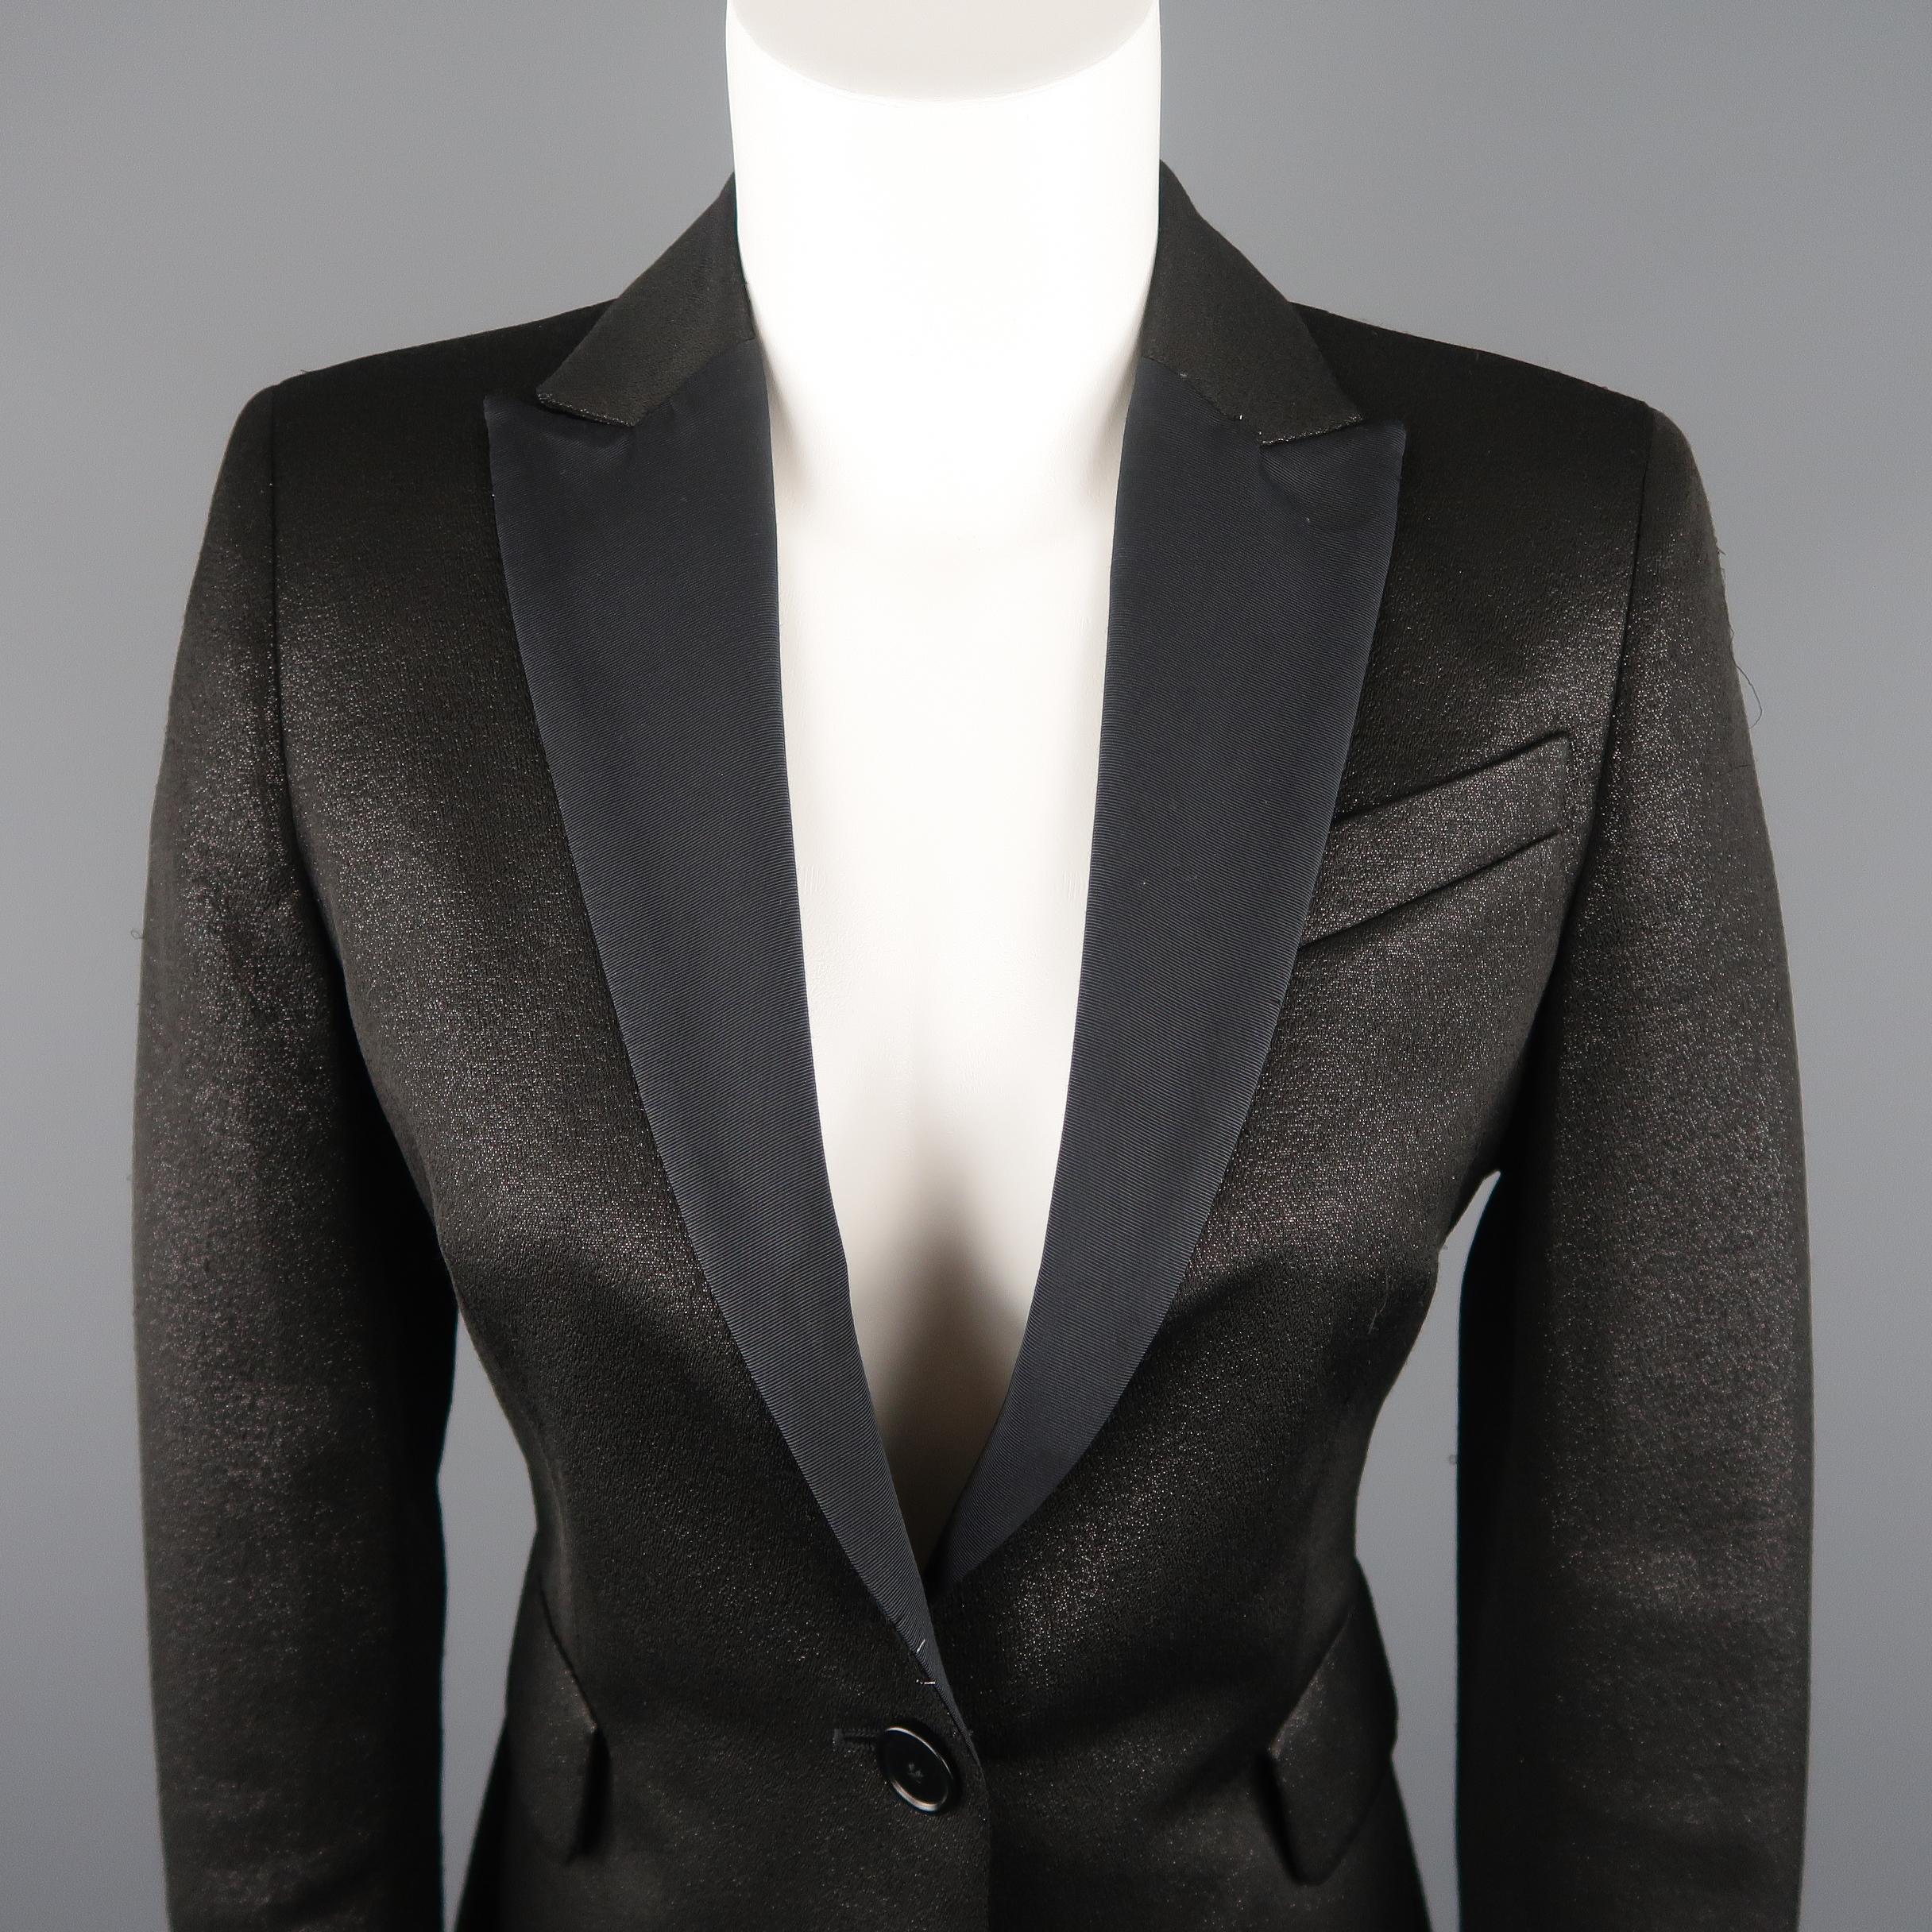 AKRIS tuxedo style jacket comes in a glittery cotton fabric with a single breasted one button closure, half twill peak lapel, and flap pockets. Minor wear throughout and mark on right lapel. As-is. Made in Switzerland. Retail price $ 1,490.00
 
Good